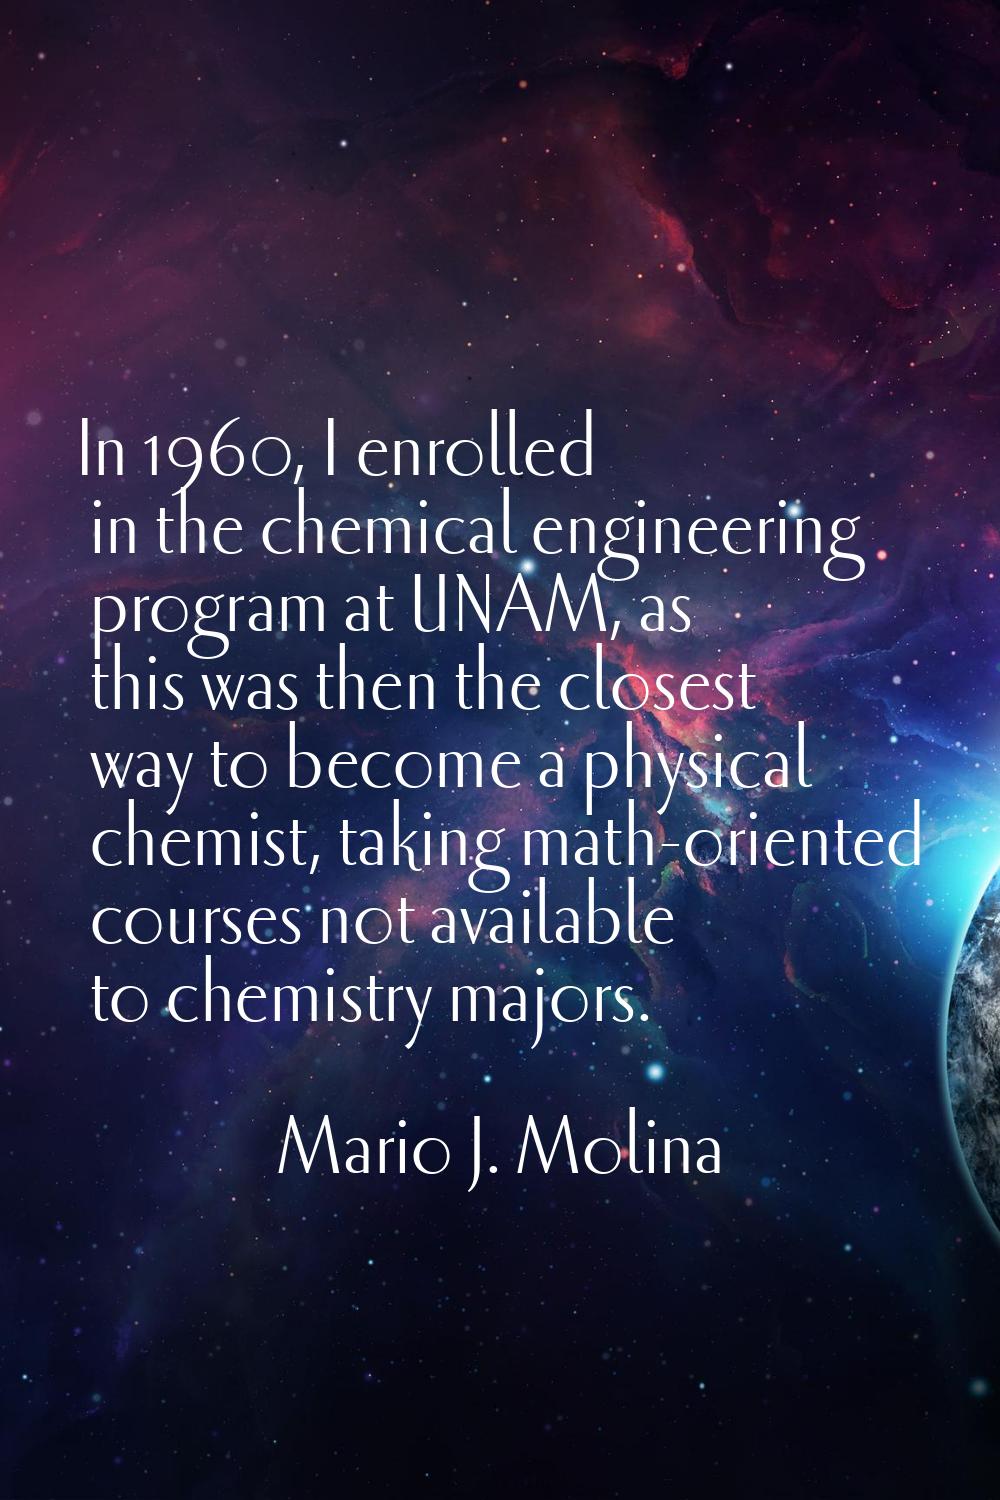 In 1960, I enrolled in the chemical engineering program at UNAM, as this was then the closest way t